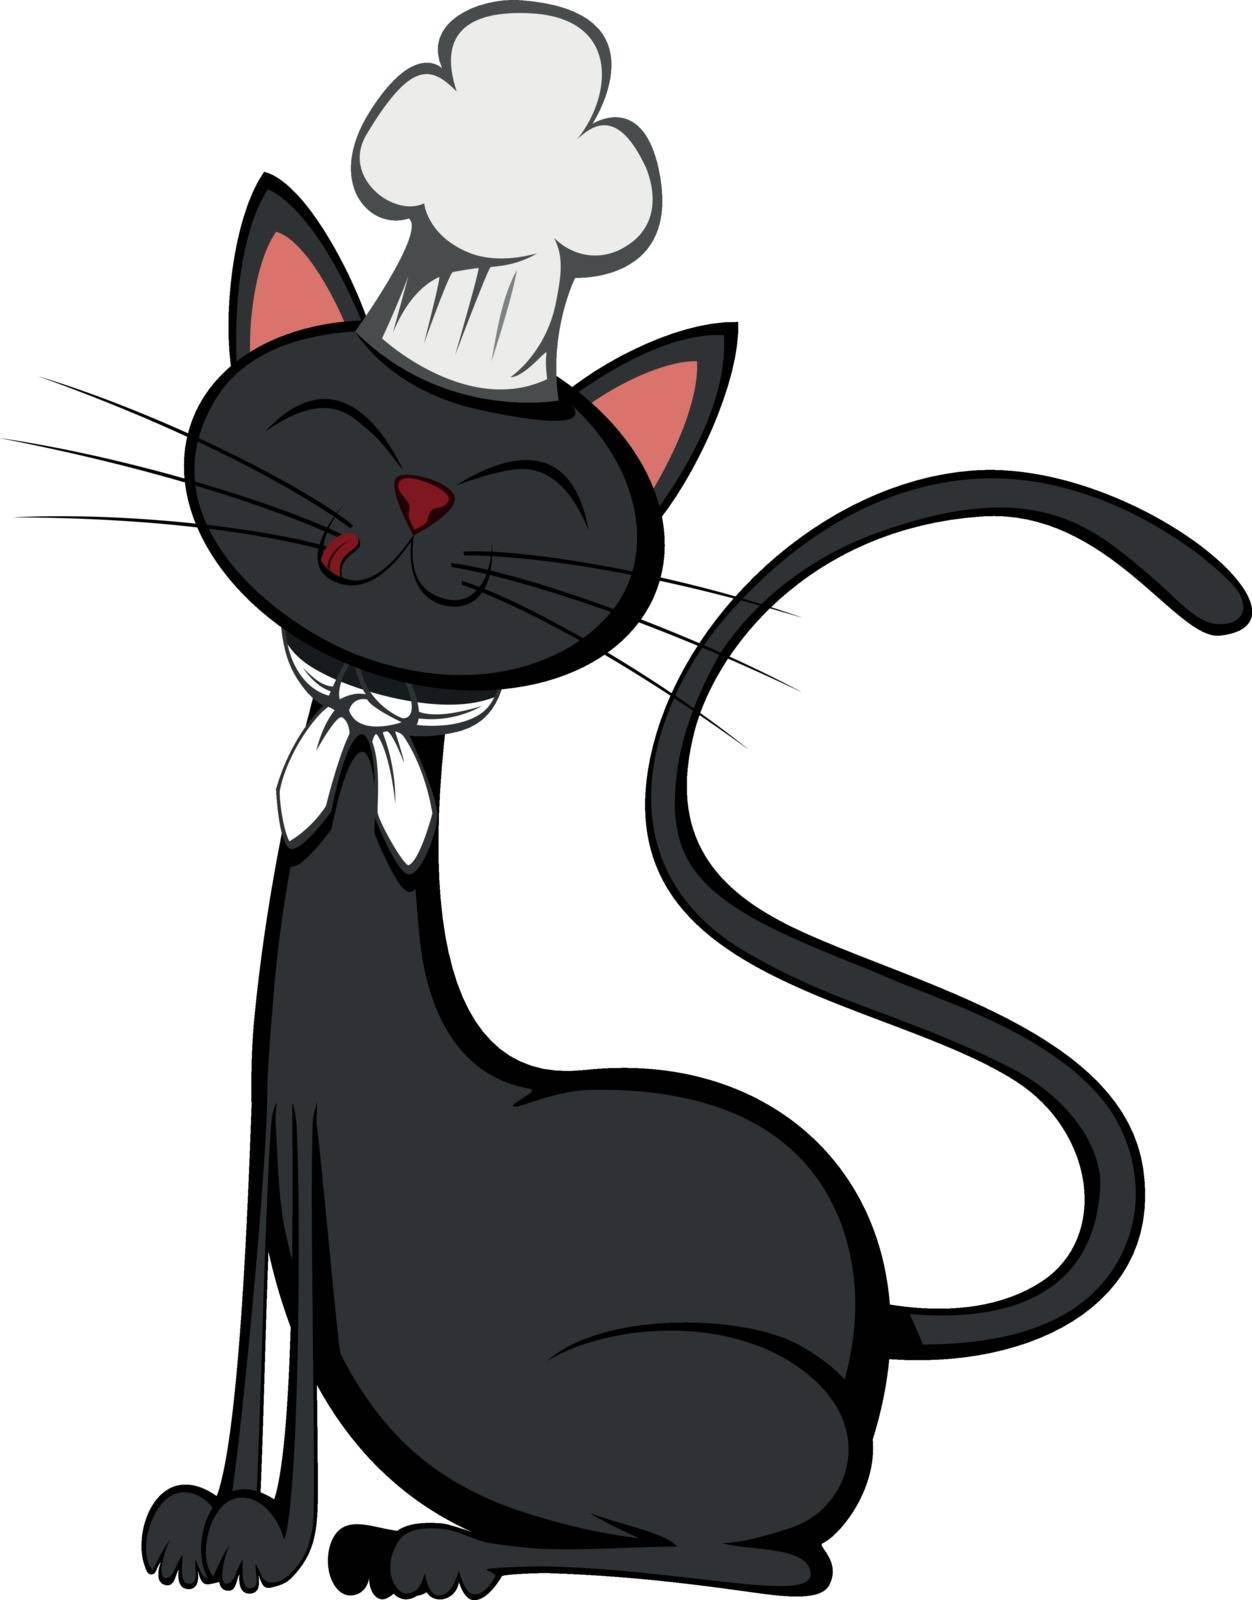 A cute black tomcat chef is sitting and smiling